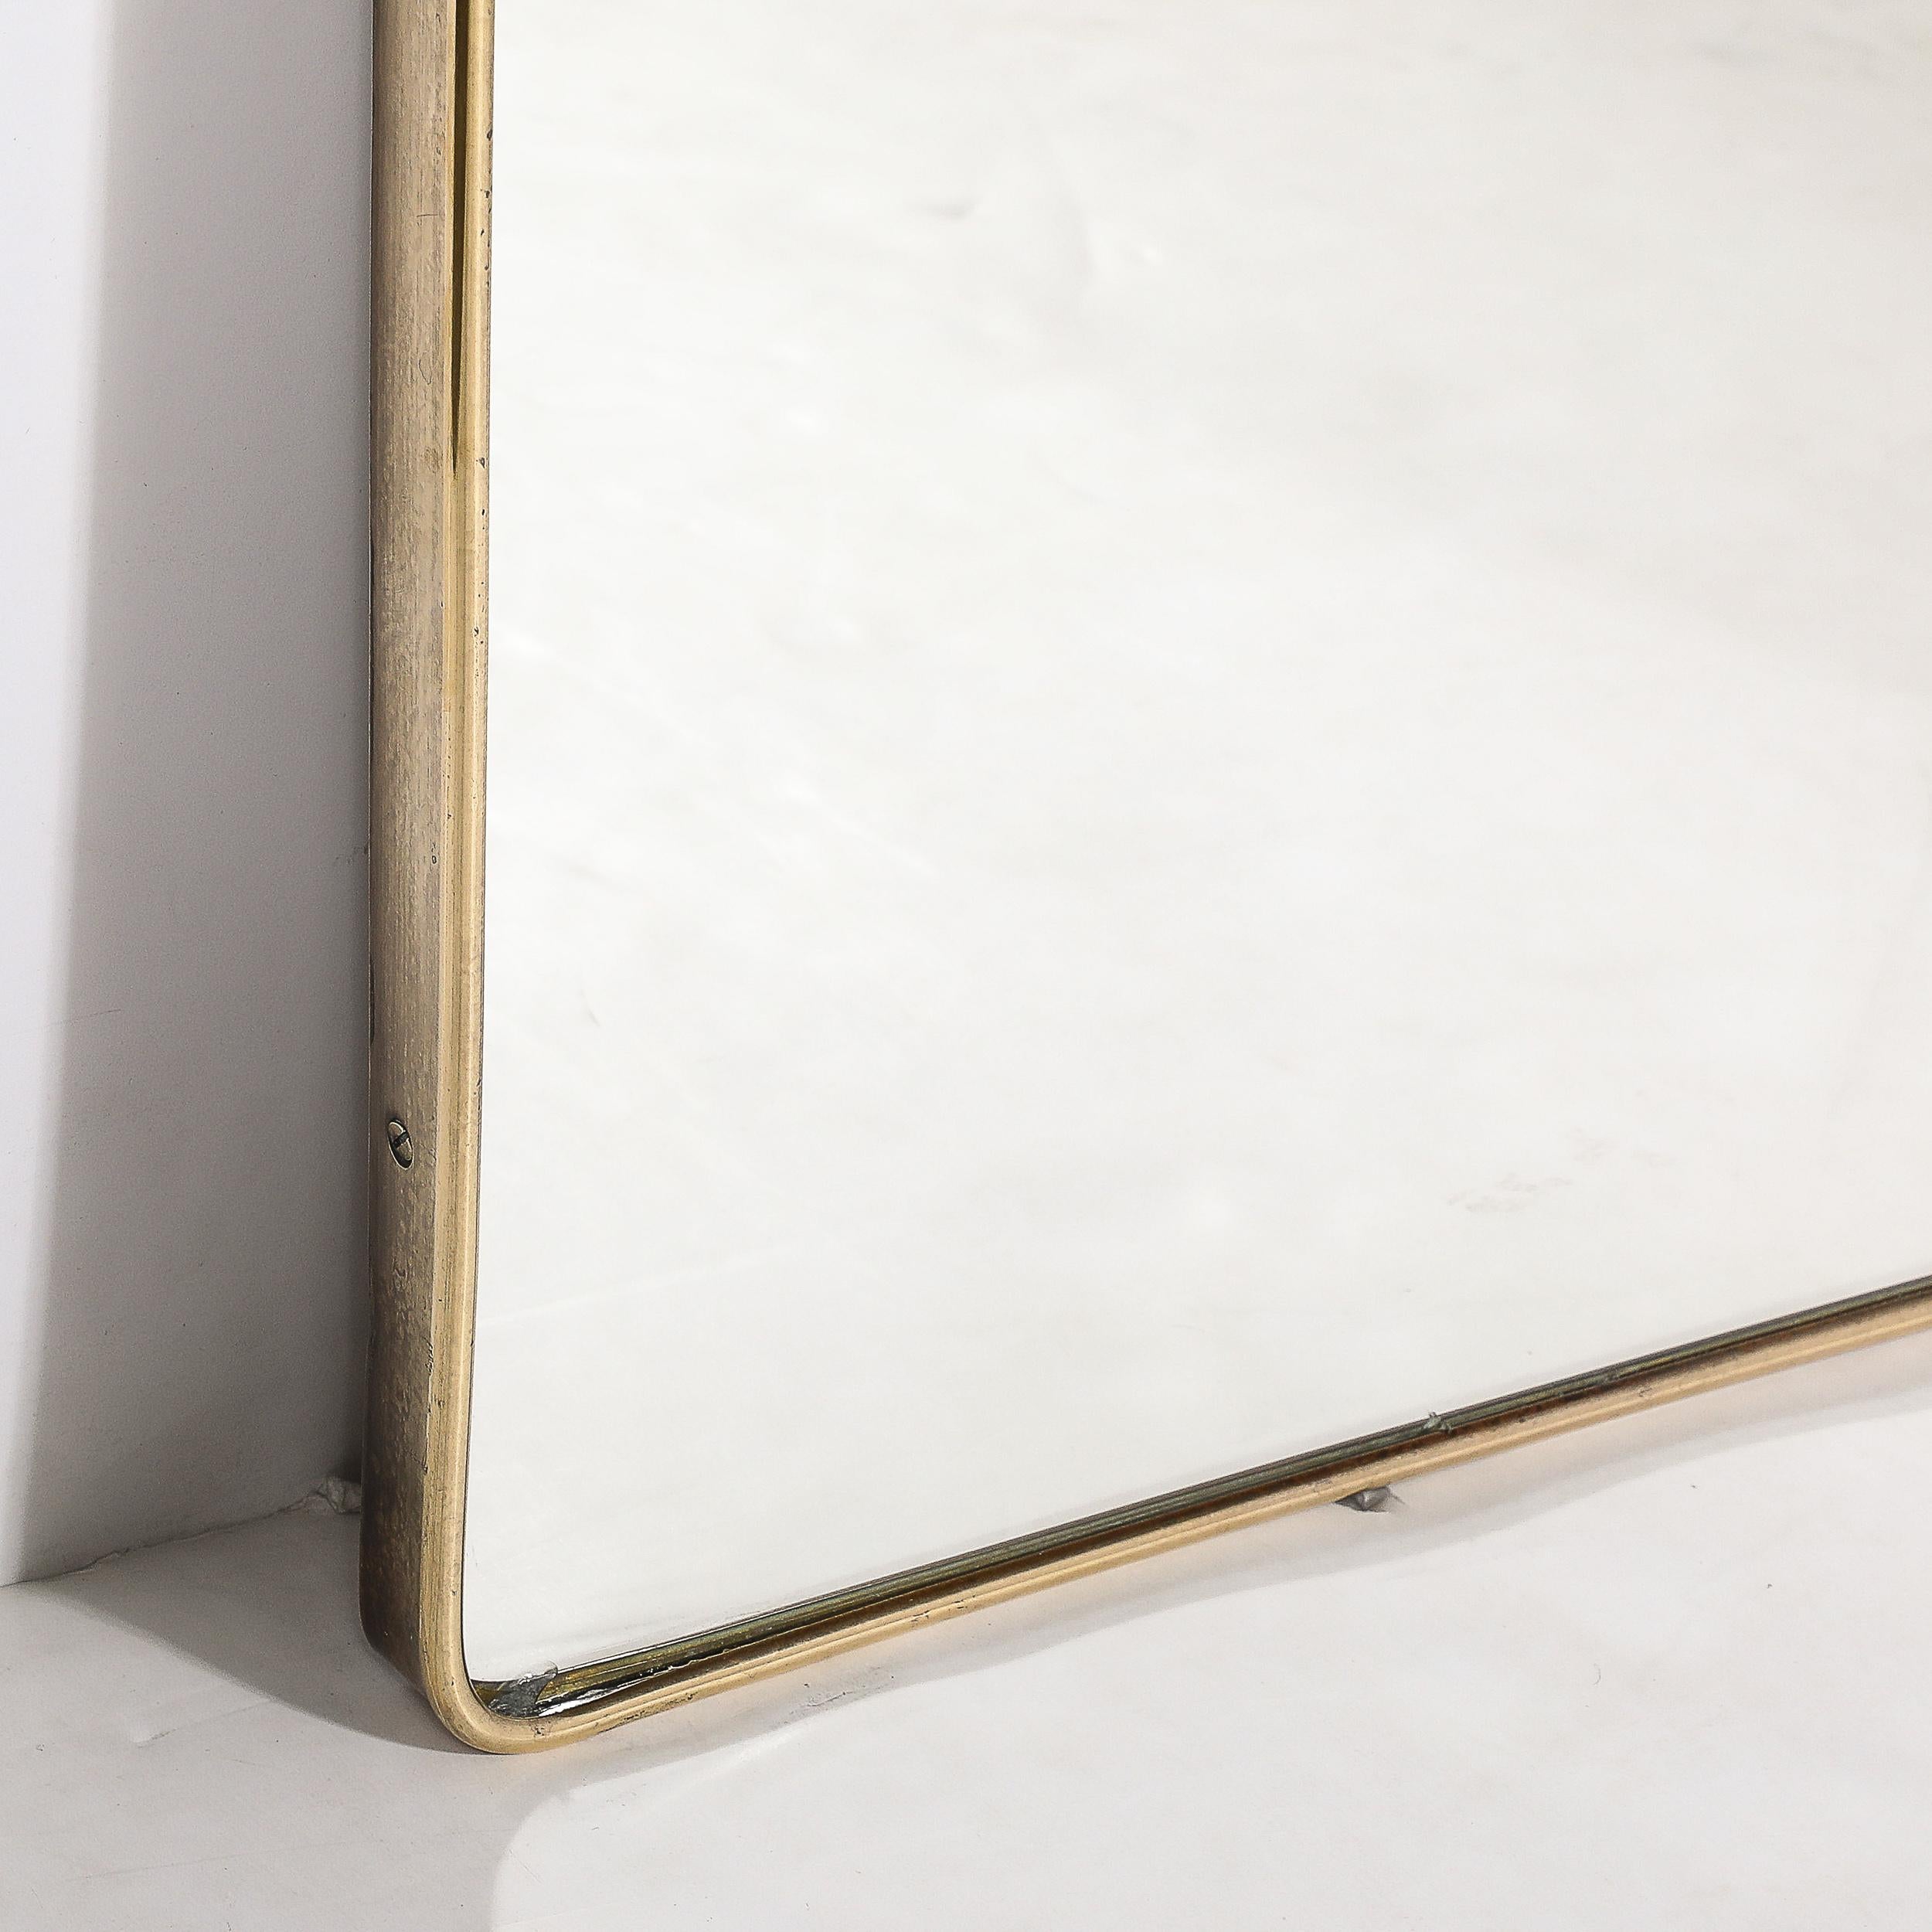 Italian Mid-Century Modernist Tapered Brass Wrapped Mirror with Concave Top Detailing For Sale